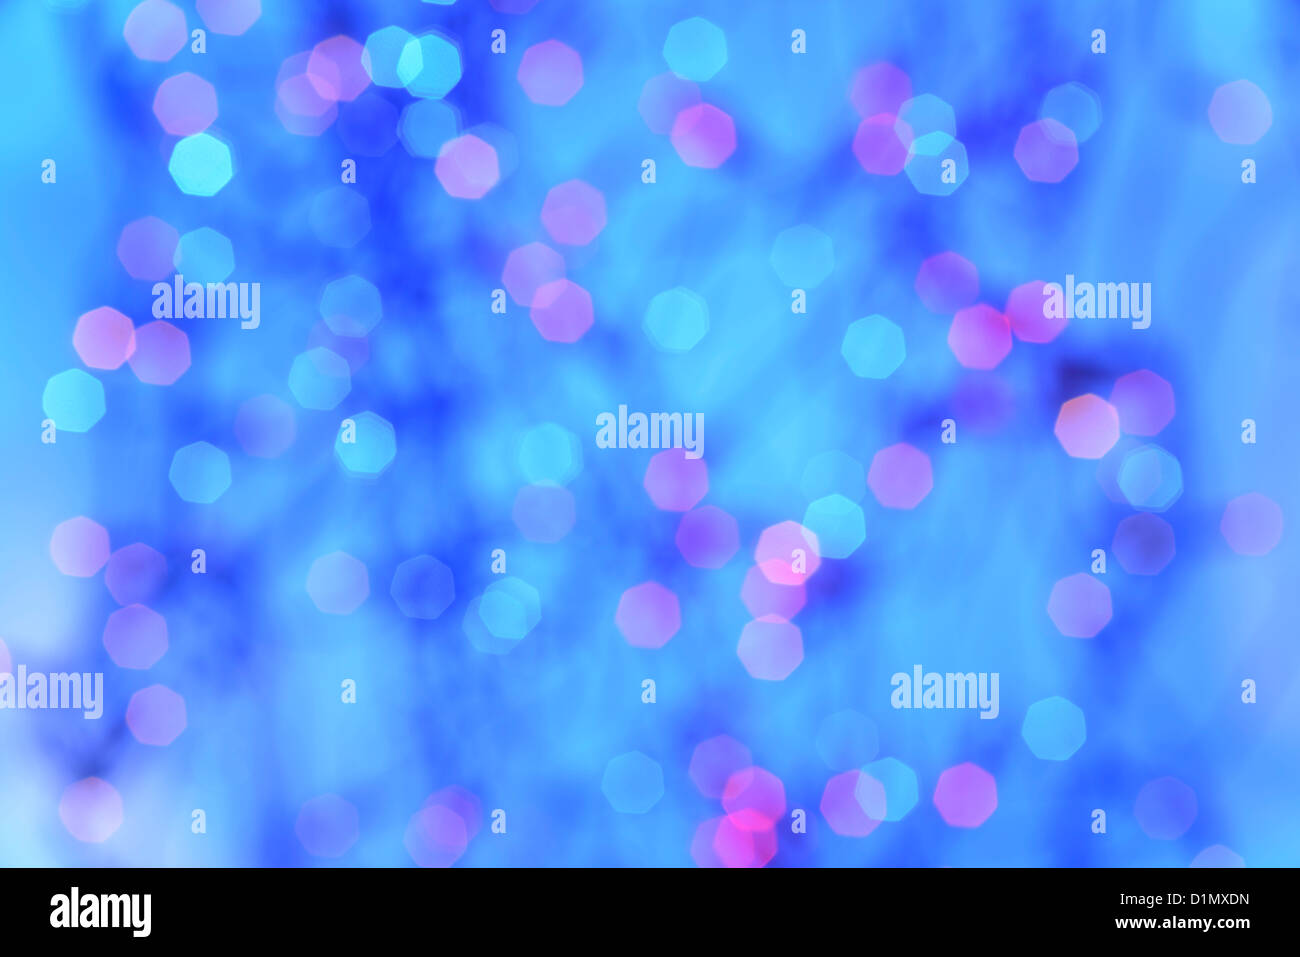 Abstract coloured lights background pattern Stock Photo